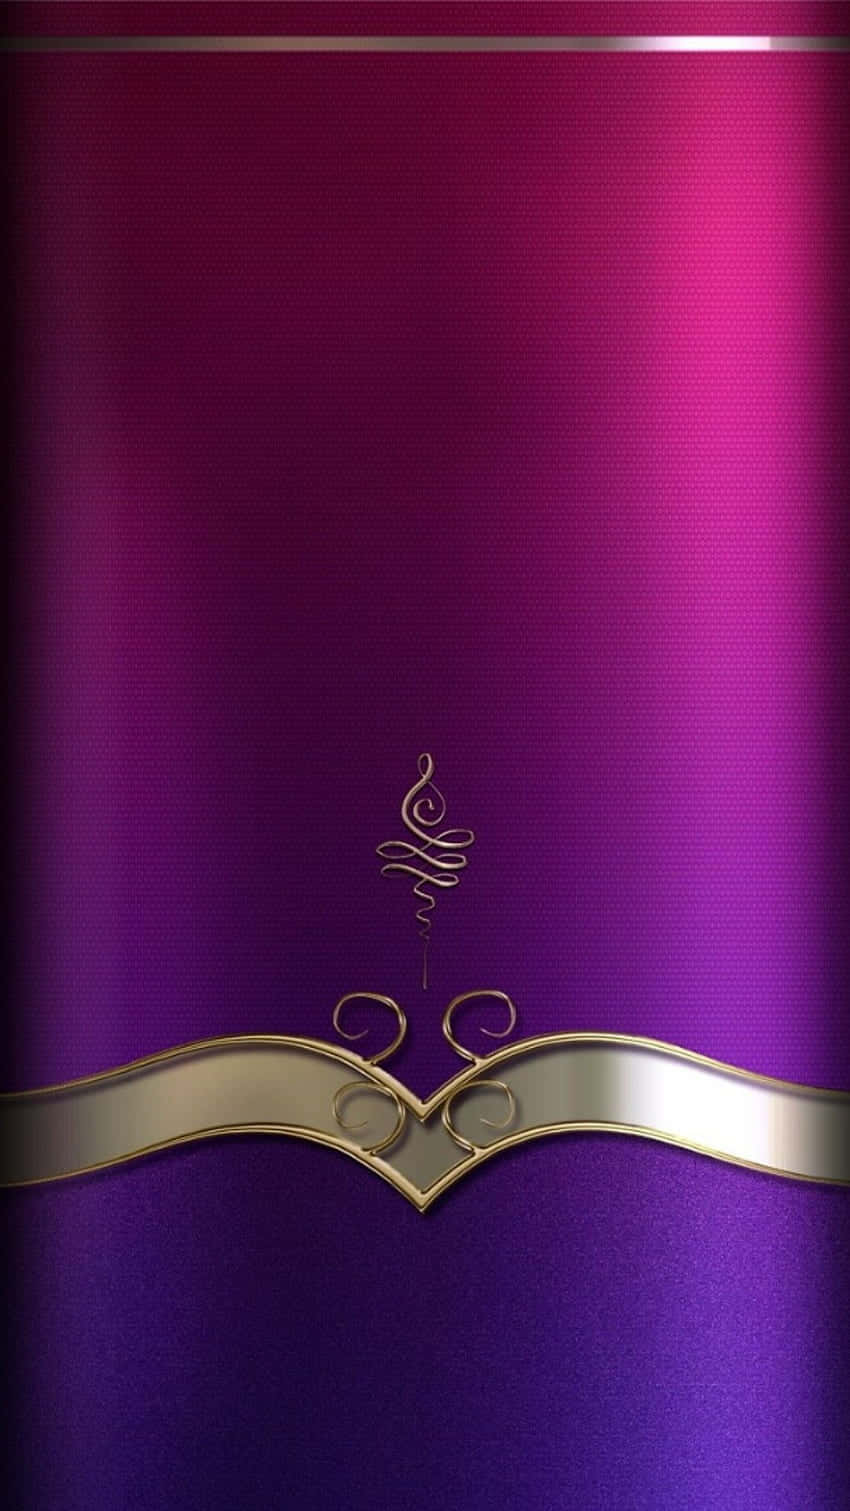 purple and gold royal background